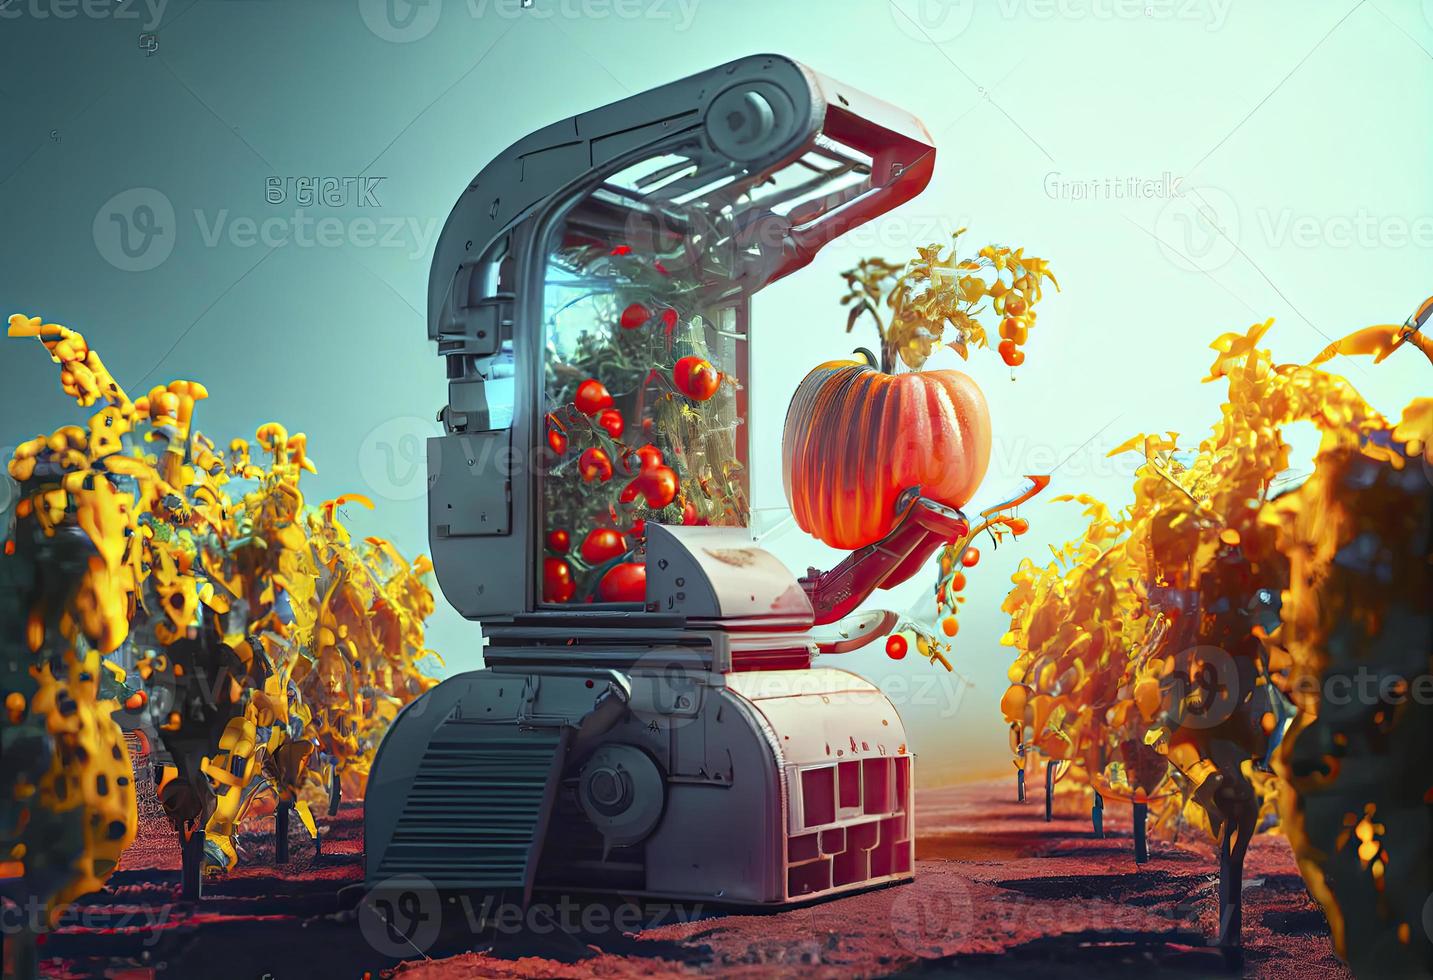 Technology automation of agriculture. Robot arm harvests vegetables in greenhouse photo